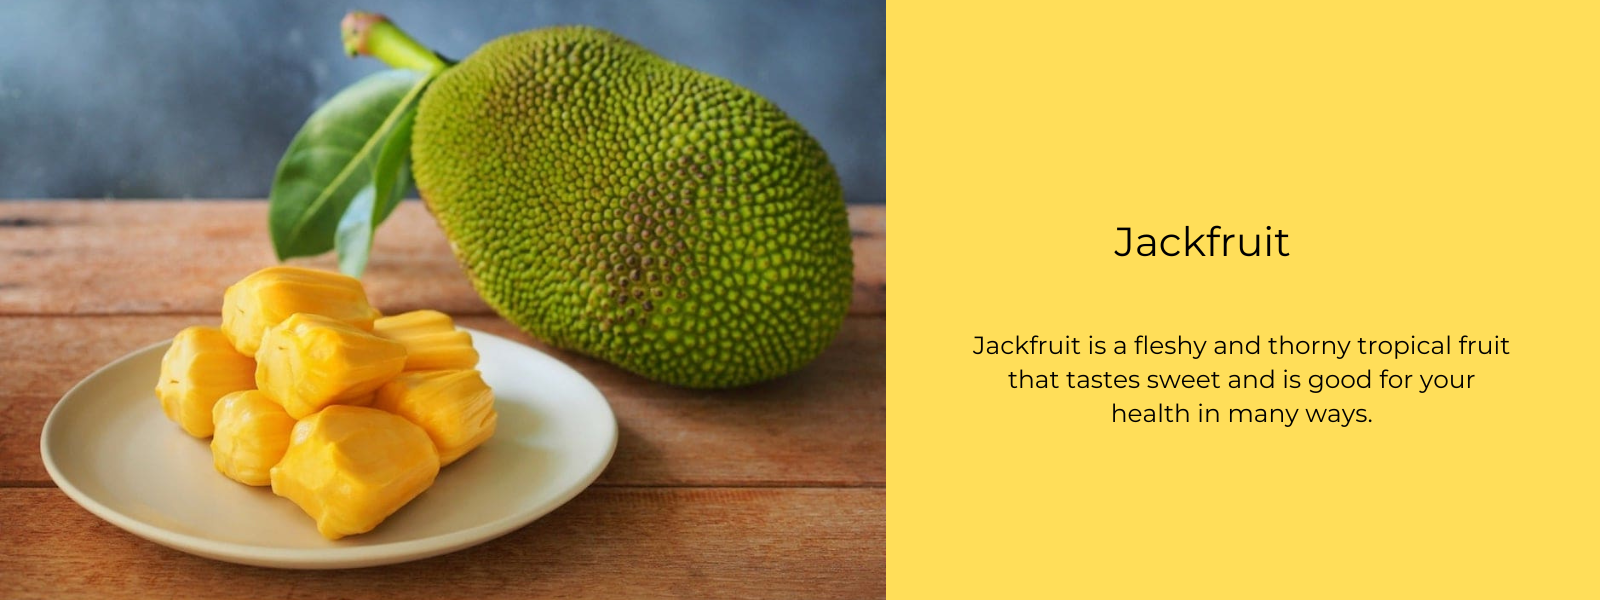 Jackfruit - Health Benefits, Uses and Important Facts